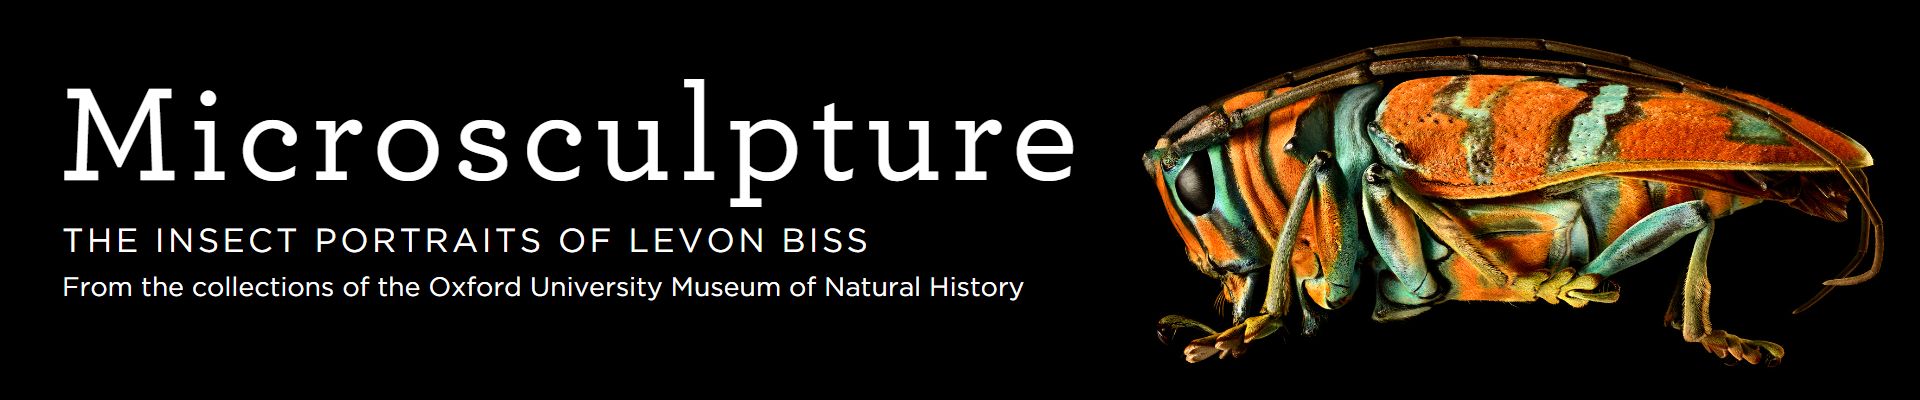 image of microsculpture exhibit title with image ©Levon Biss